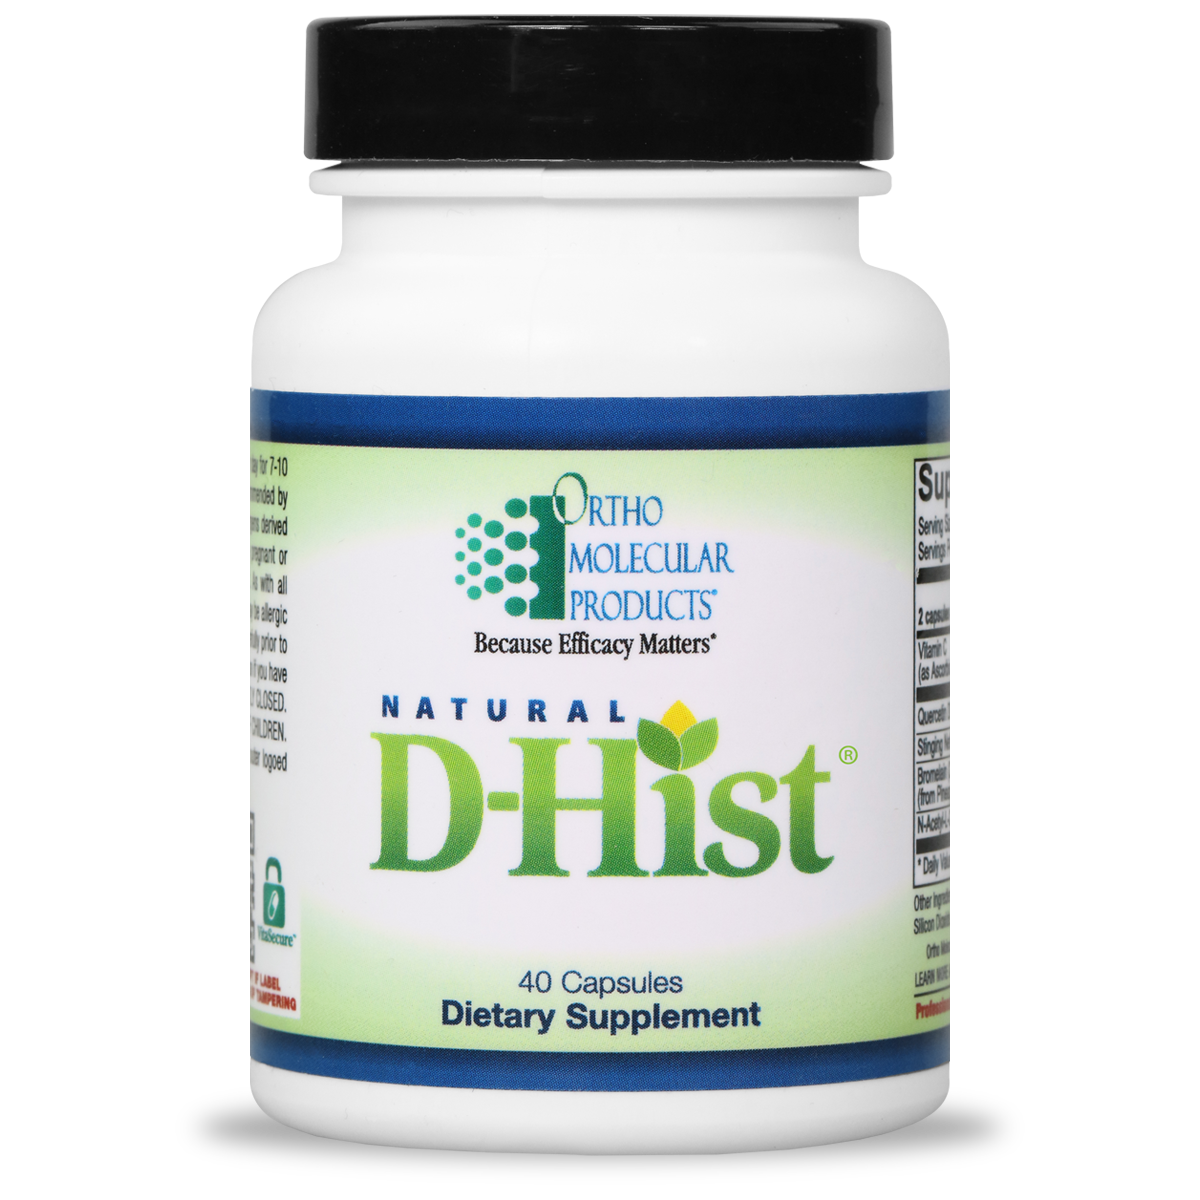 Buy Natural D Hist Supplement from HDRx Metro Detroit Michigan Area